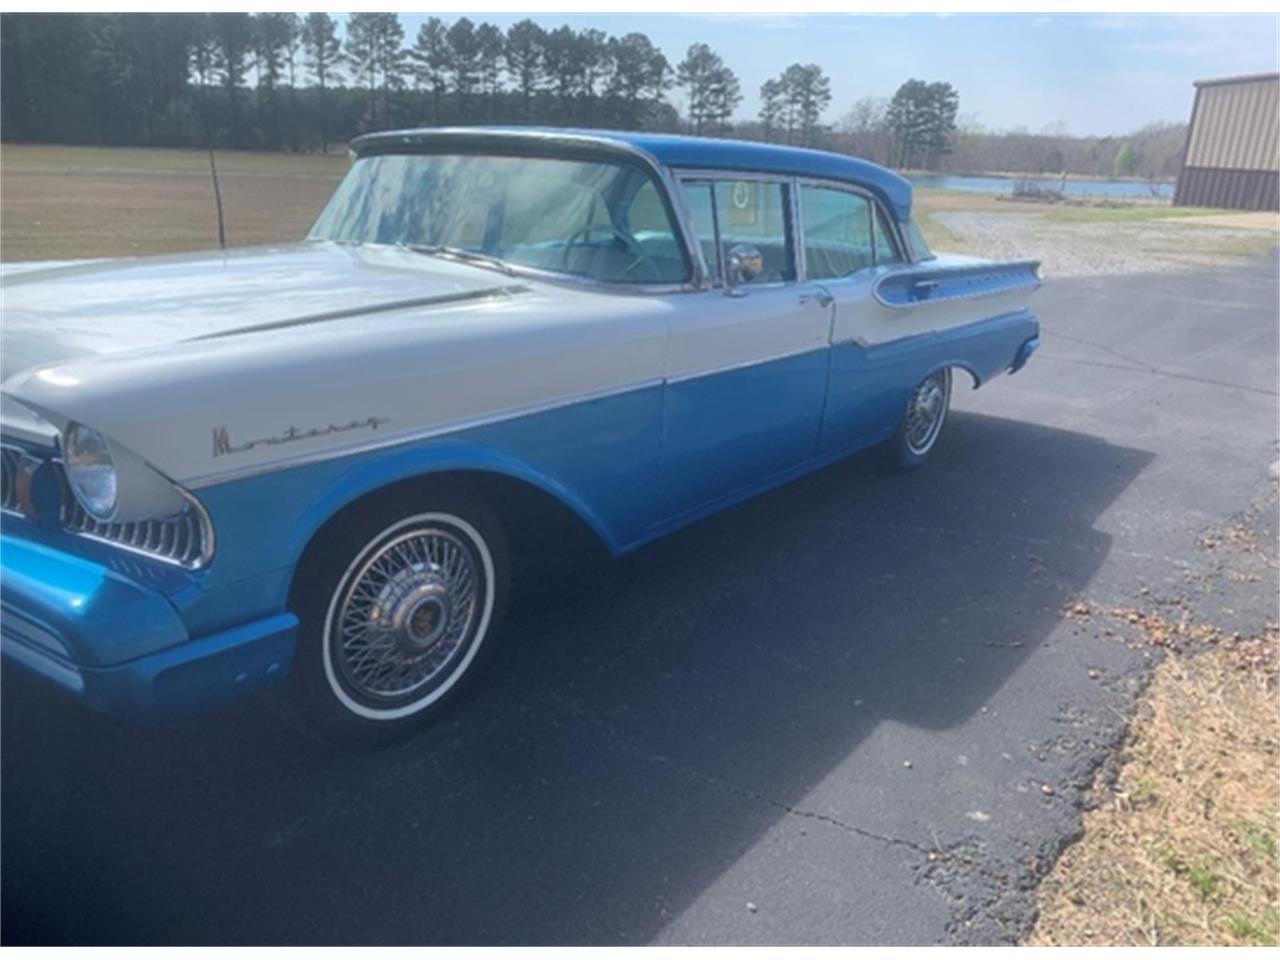 For Sale at Auction: 1957 Mercury Monterey in Shawnee, Oklahoma for sale in Shawnee, OK